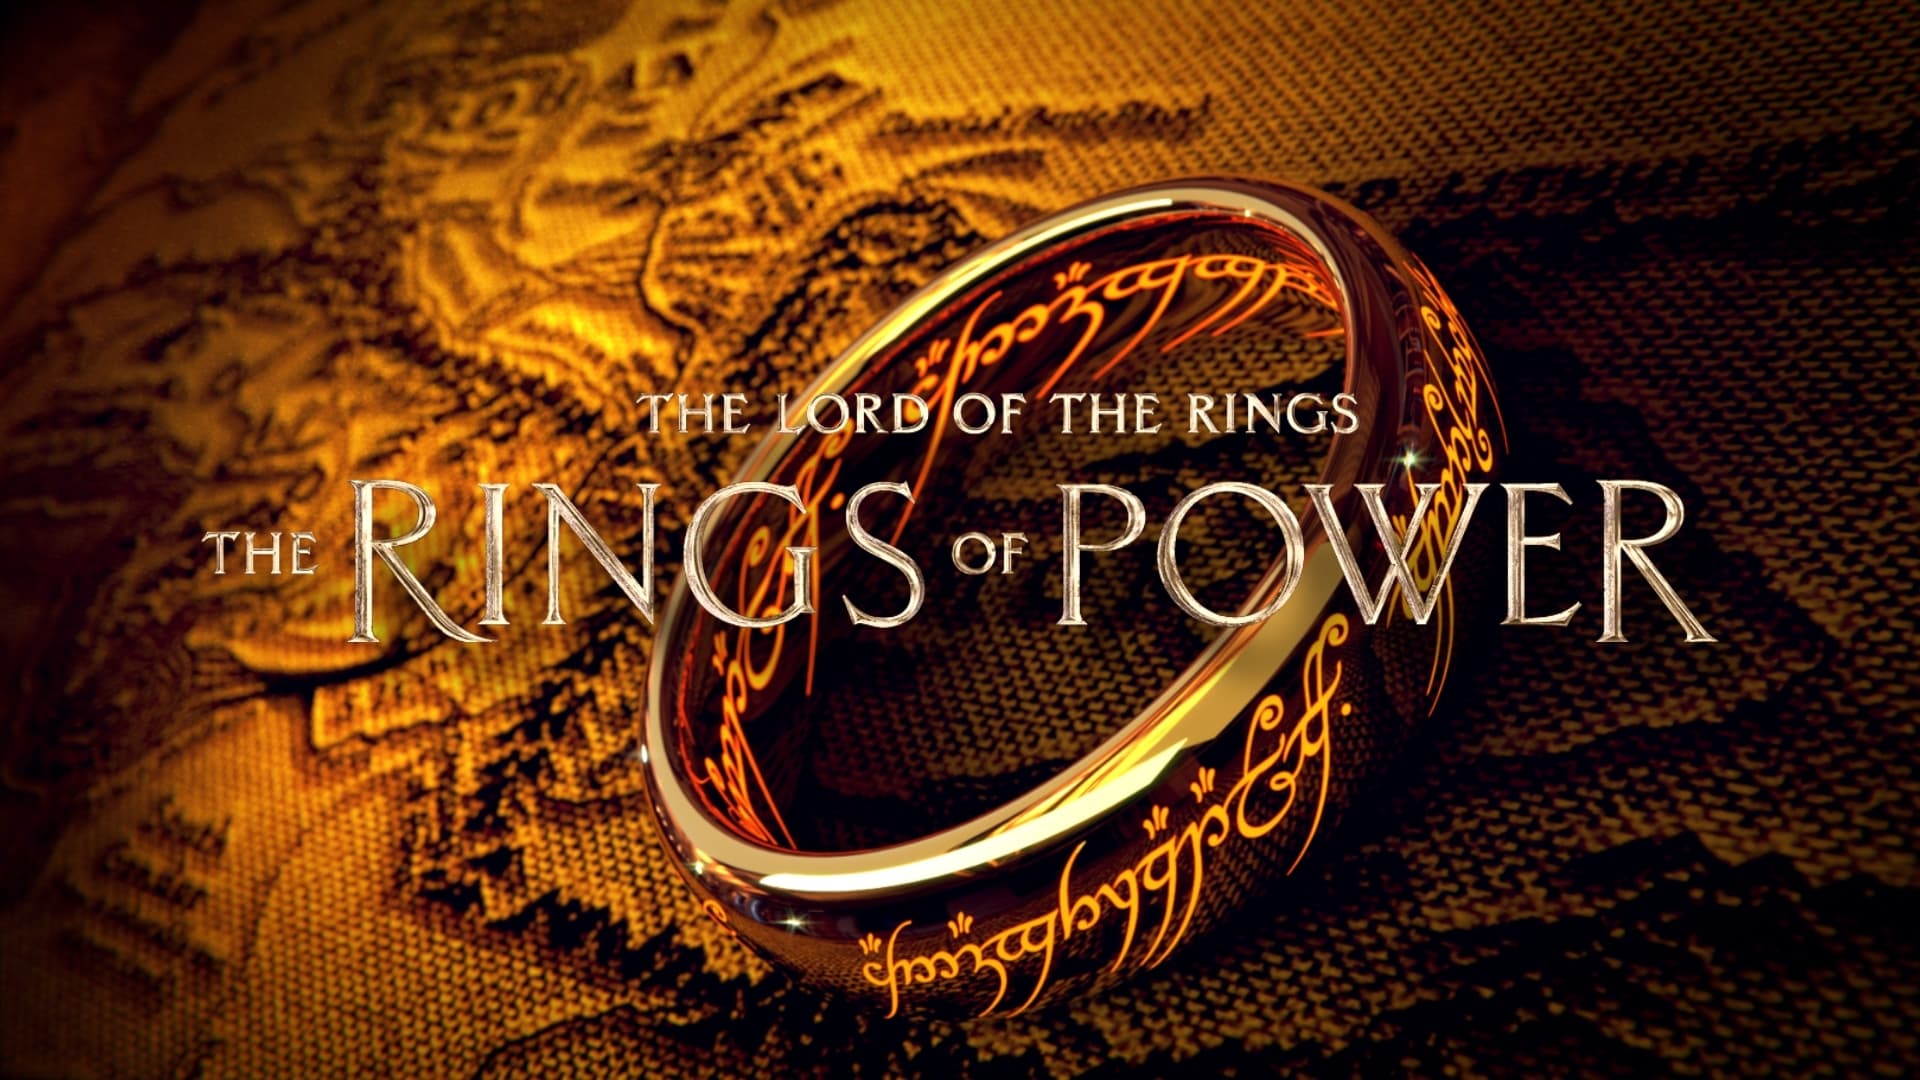 The Lord of the Rings: The Rings of Power - Season 2